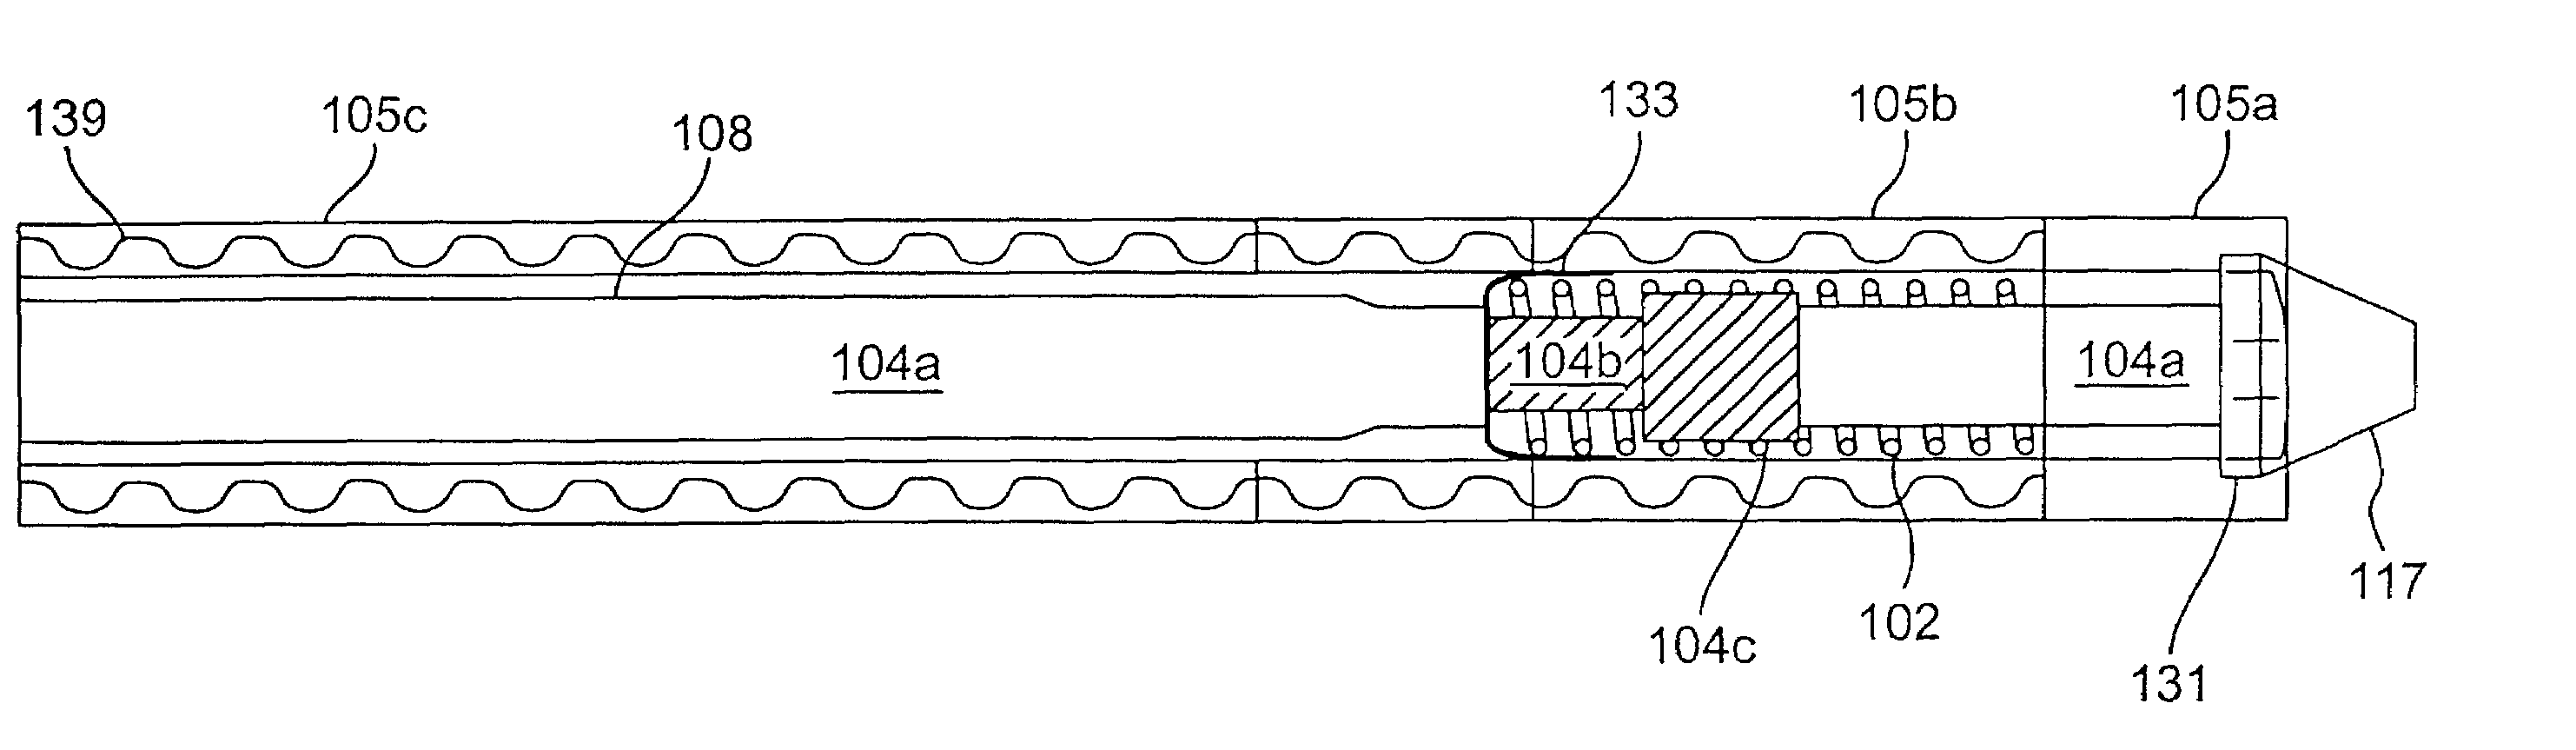 Endoscopic stent delivery system and method